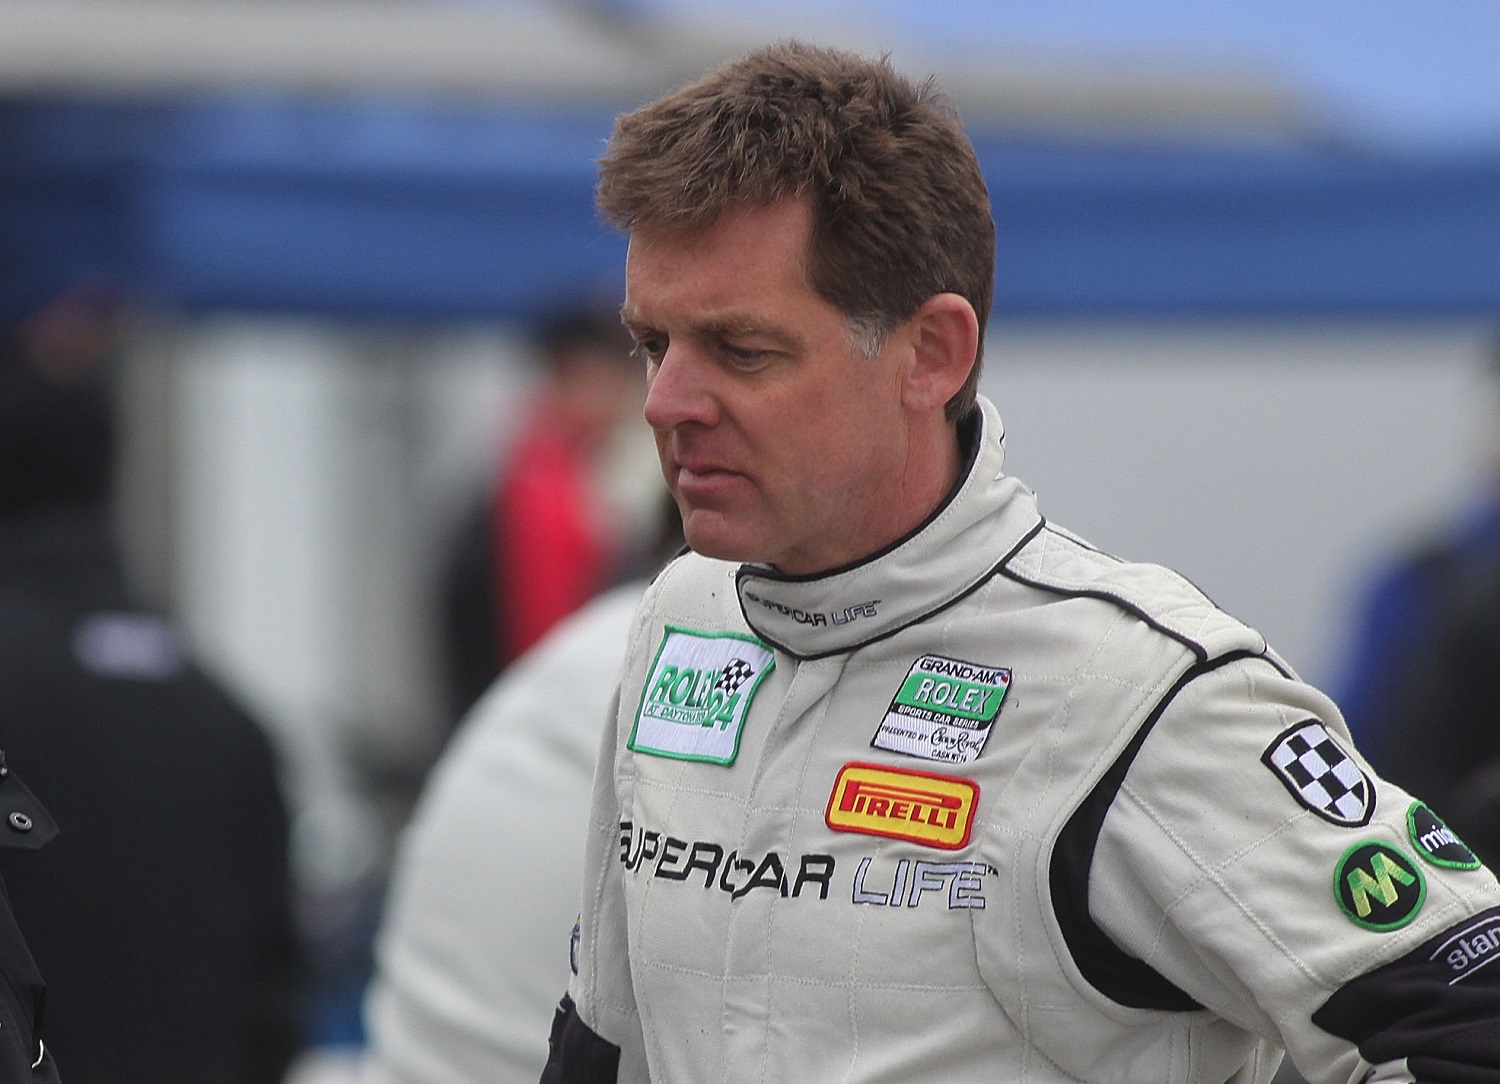 Businessman Scott Tucker became a racecar driver at the age of 44 and dominated the Le Mans Series soon afterward.